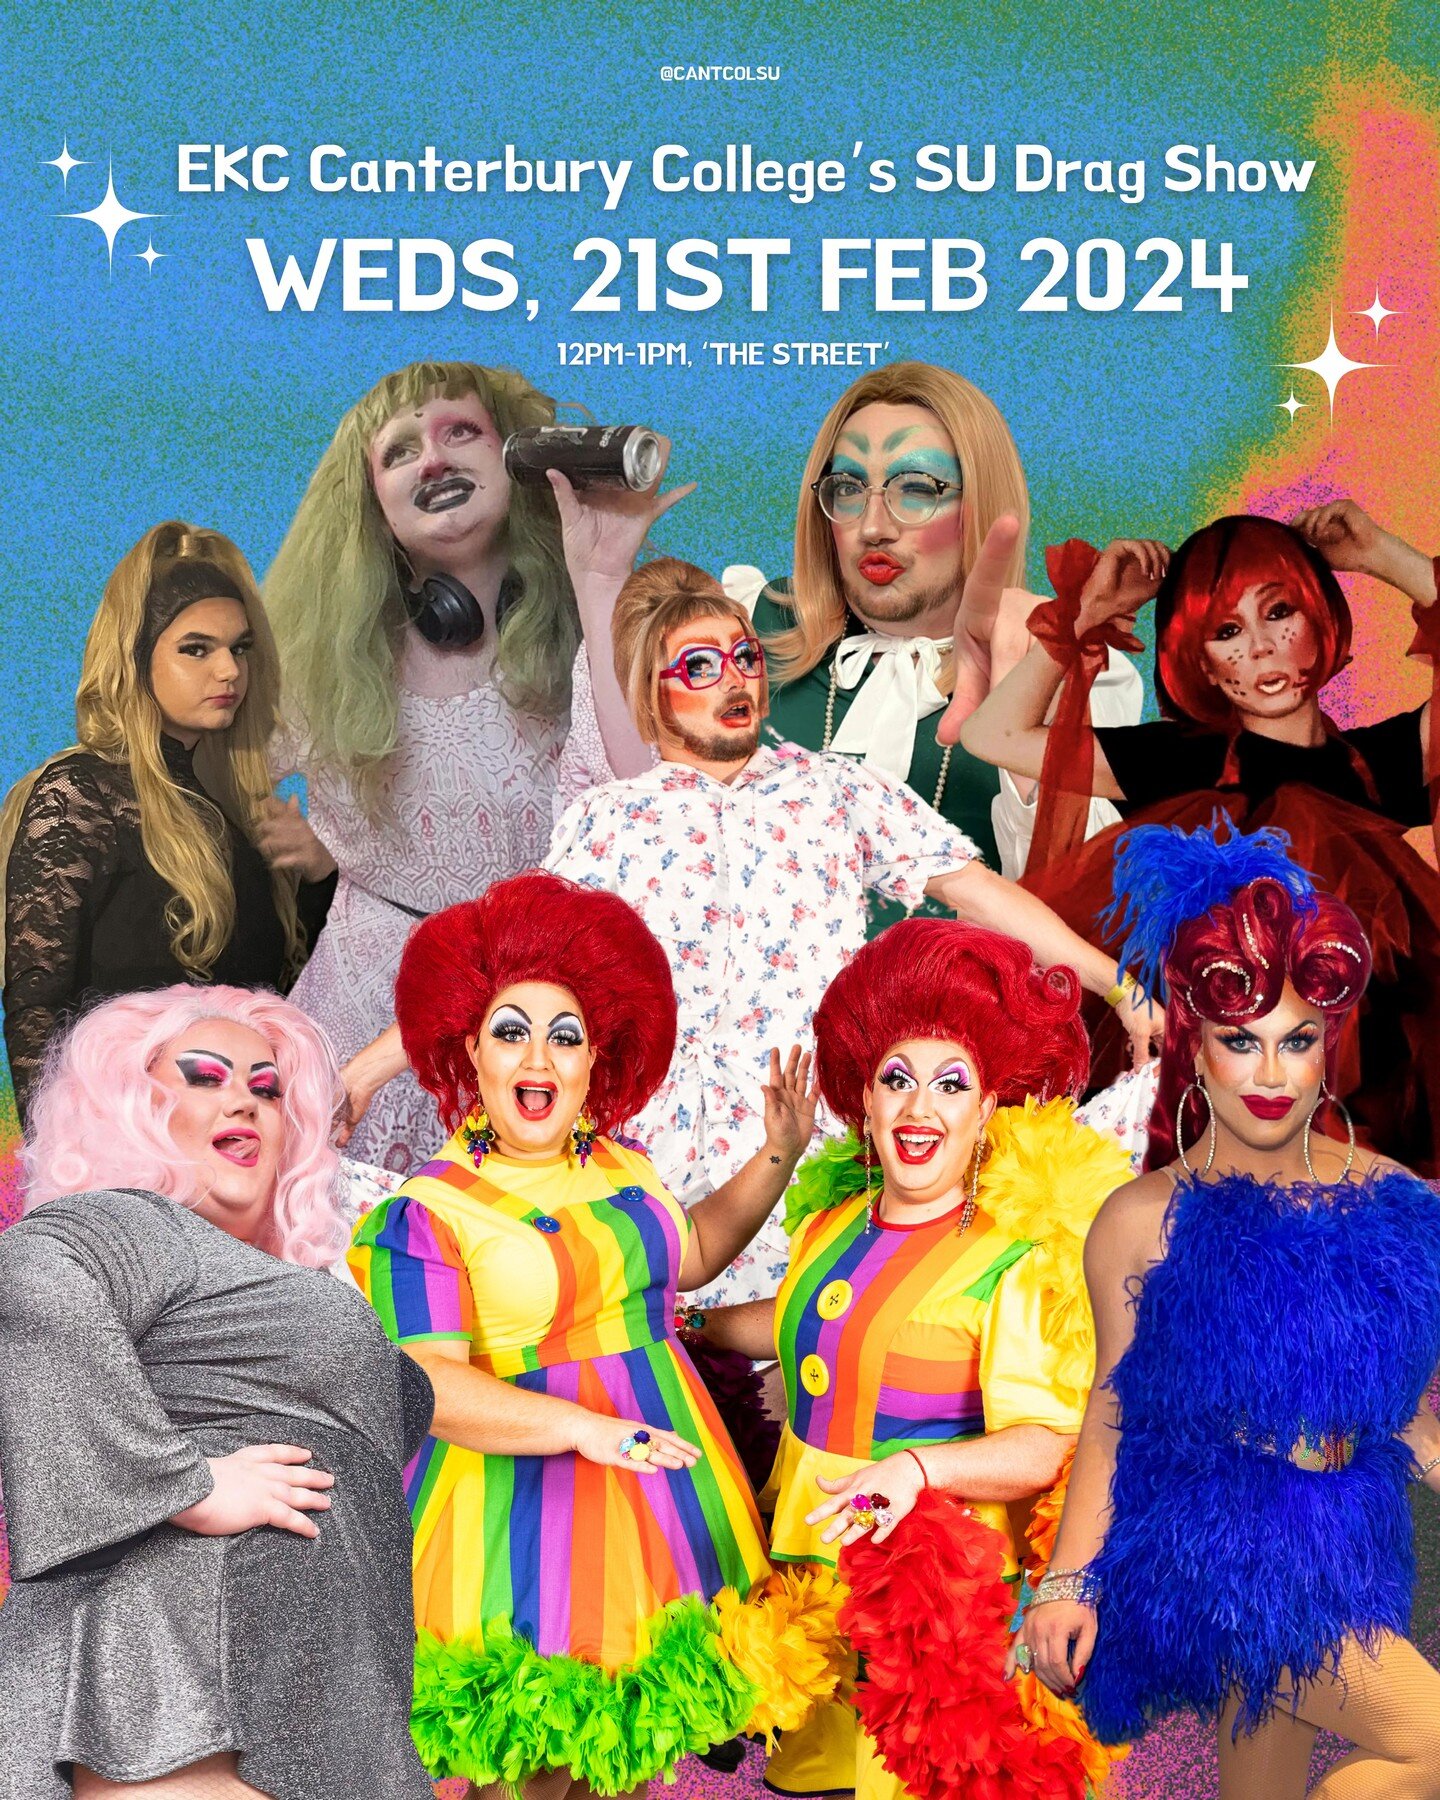 🌟 Get ready to sashay and slay! Presenting the fierce lineup of drag queens gracing the stage at Canterbury College! 👑 

Get ready to be dazzled by the talents of Cigarette Salad, Janet District Council, Betty Late'n Never, Cheryl Shots, Delilah Ti